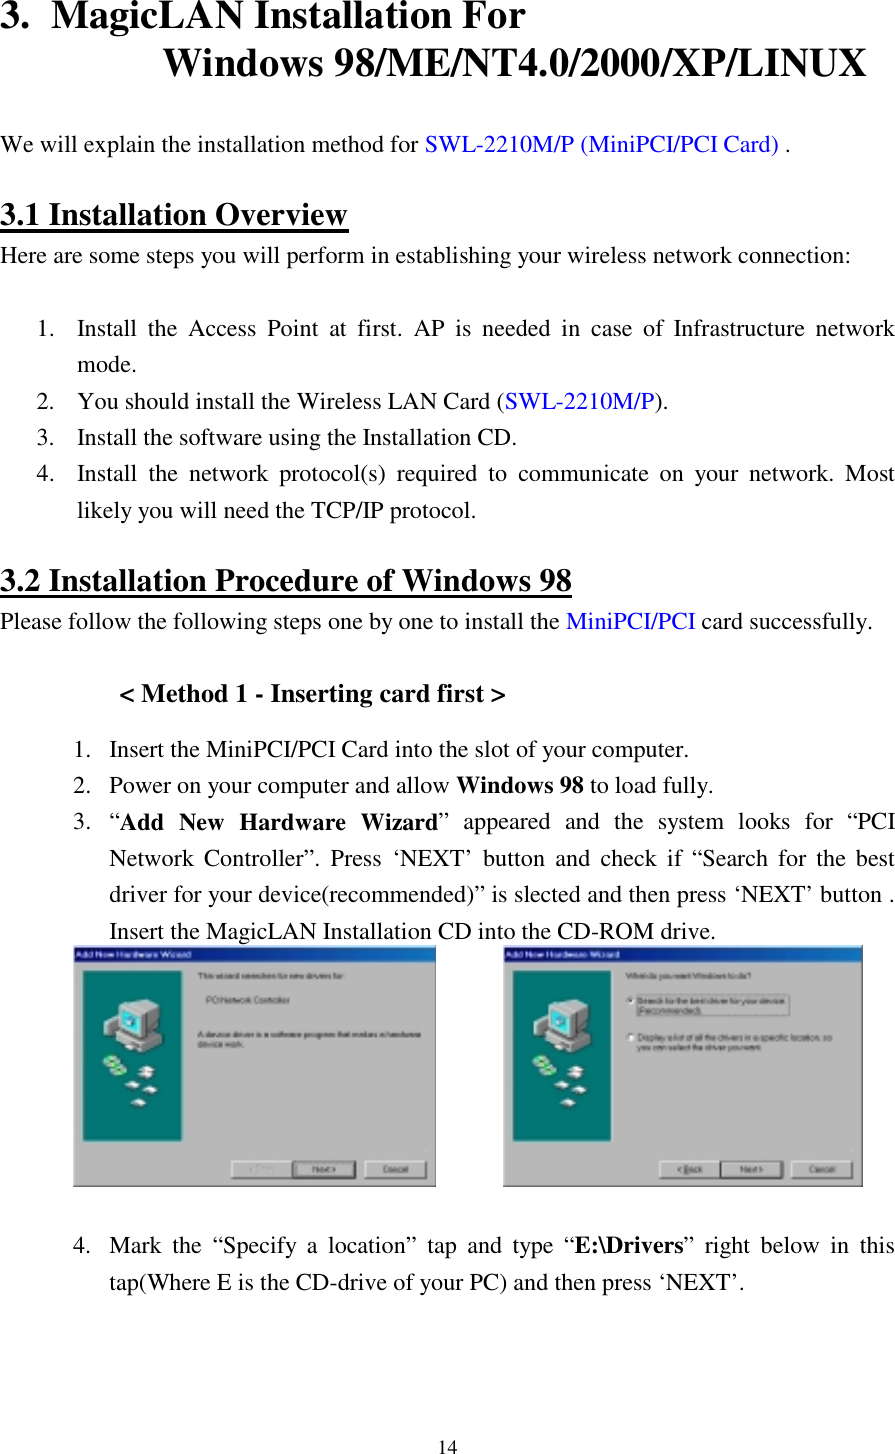  14 3.  MagicLAN Installation For                          Windows 98/ME/NT4.0/2000/XP/LINUX  We will explain the installation method for SWL-2210M/P (MiniPCI/PCI Card) .  3.1 Installation Overview Here are some steps you will perform in establishing your wireless network connection:  1.  Install the Access Point at first. AP is needed in case of Infrastructure network mode. 2. You should install the Wireless LAN Card (SWL-2210M/P).  3.  Install the software using the Installation CD. 4.  Install the network protocol(s) required to communicate on your network. Most likely you will need the TCP/IP protocol.  3.2 Installation Procedure of Windows 98 Please follow the following steps one by one to install the MiniPCI/PCI card successfully.  &lt; Method 1 - Inserting card first &gt; 1.  Insert the MiniPCI/PCI Card into the slot of your computer.  2.  Power on your computer and allow Windows 98 to load fully.  3. “Add New Hardware Wizard” appeared and the system looks for “PCI Network Controller”. Press ‘NEXT’ button and check if “Search for the best driver for your device(recommended)” is slected and then press ‘NEXT’ button . Insert the MagicLAN Installation CD into the CD-ROM drive.                4.  Mark the “Specify a location” tap and type “E:\Drivers” right below in this tap(Where E is the CD-drive of your PC) and then press ‘NEXT’. 